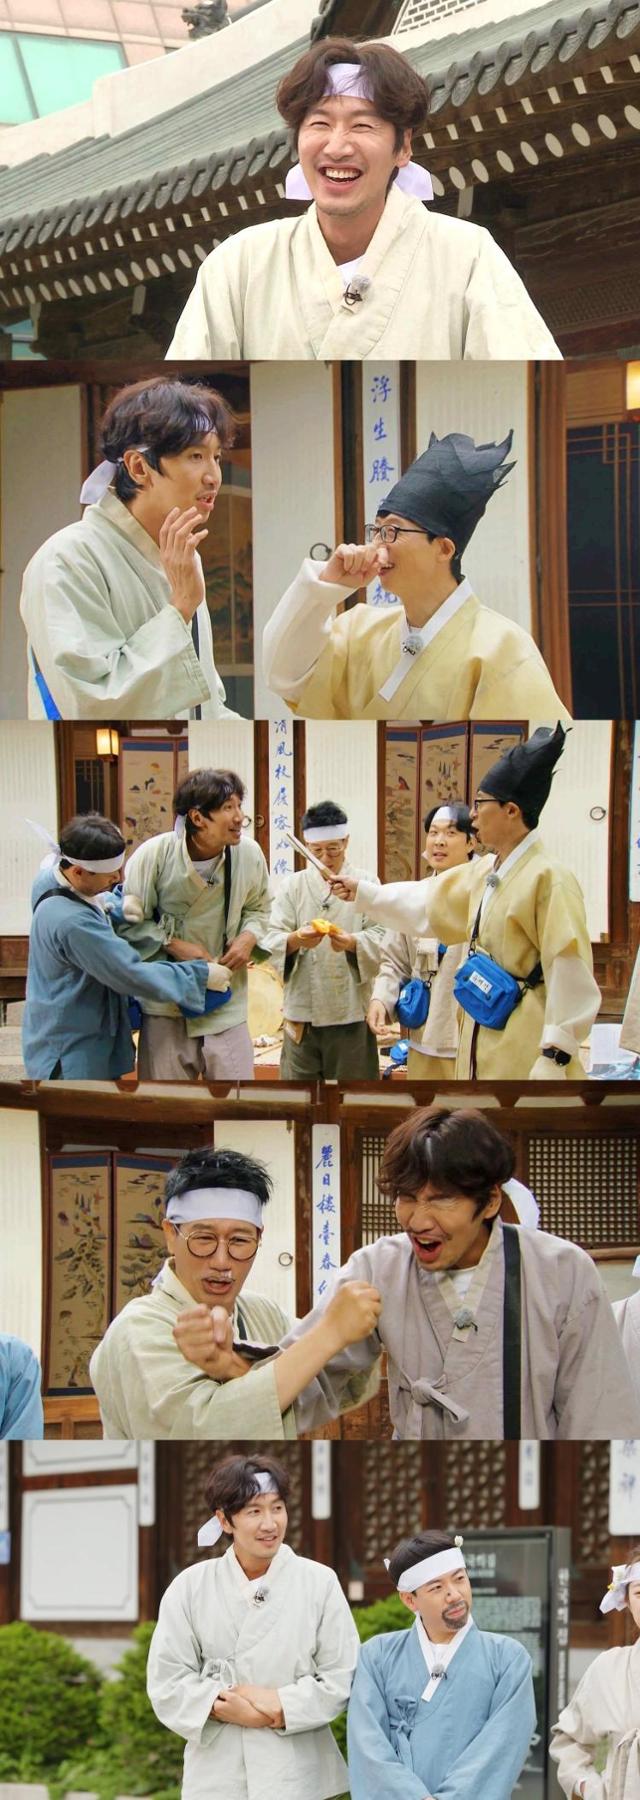 The farewell of Running Man Lee Kwang-soo is included.On SBS entertainment program Running Man, which will be broadcast on the 6th, Lee Kwang-soo and members will be drawn only before getting off.The members who met for the first time since the Lee Kwang-soo got off the air last week started Lee Kwang-soo as soon as the filming started, saying, Im getting off.The members were shown to the second stage of the departure, Ha: If I recruit my members, Cha: Cha Eun-woo, Cha Tae-hyun, and the scene was laughed.What will the last dinner be? He said, delightfully dissolving Lee Kwang-soos departure in the Running Man Style .Following last week, the members of this week will constantly mention getting off and Lee Kwang-soos era of suffering will continue.This day is a race where members who turned into a head of the heart serve three meals to Yoo Jae-Suk. Yoo Jae-Suk opened the opening door to Lee Kwang-soo, saying, It is a very messy thing to go out (get off).Lee Kwang-soos betrayal also ran on the day, and Lee Kwang-soo was caught trying to get other deer to get more leaflets from Yoo Jae-Suk, and secretly stealing the leaflets to another place.The members said, Where are you going before you go out!On the other hand, Ji Seok-jin, who declared Crying a Cross once a time until he gets off, shouted the Cross again and made a sense of being a cross.The beautiful farewell formula with Lee Kwang-soo, Running Man down, will be released at Running Man, which will be broadcasted at 5 pm on the 6th.